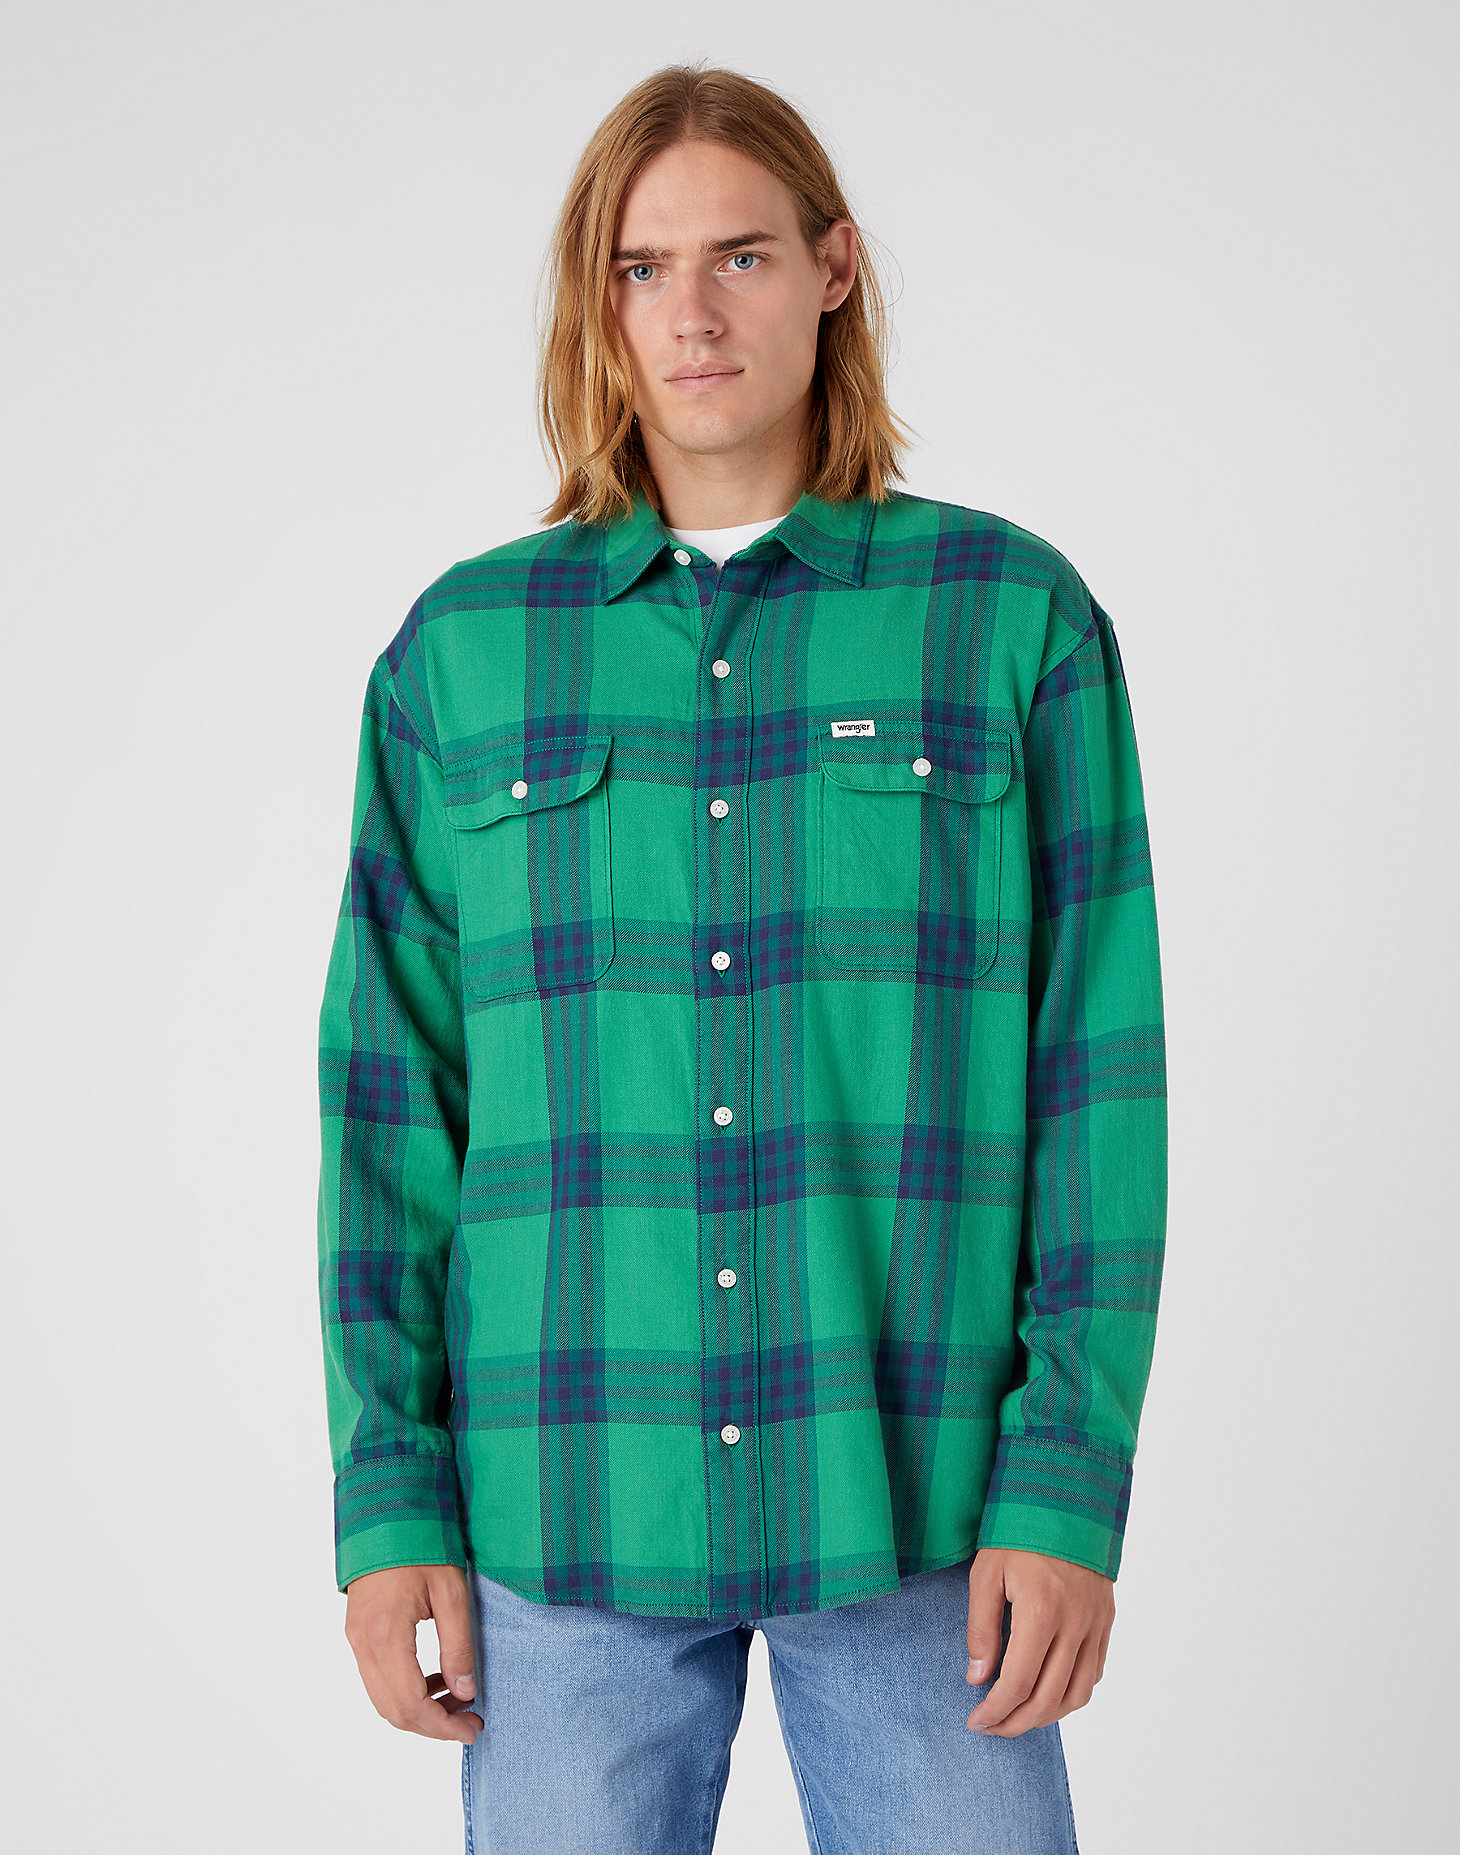 Patch Pocket Shirt in Pine Green alternative view 2